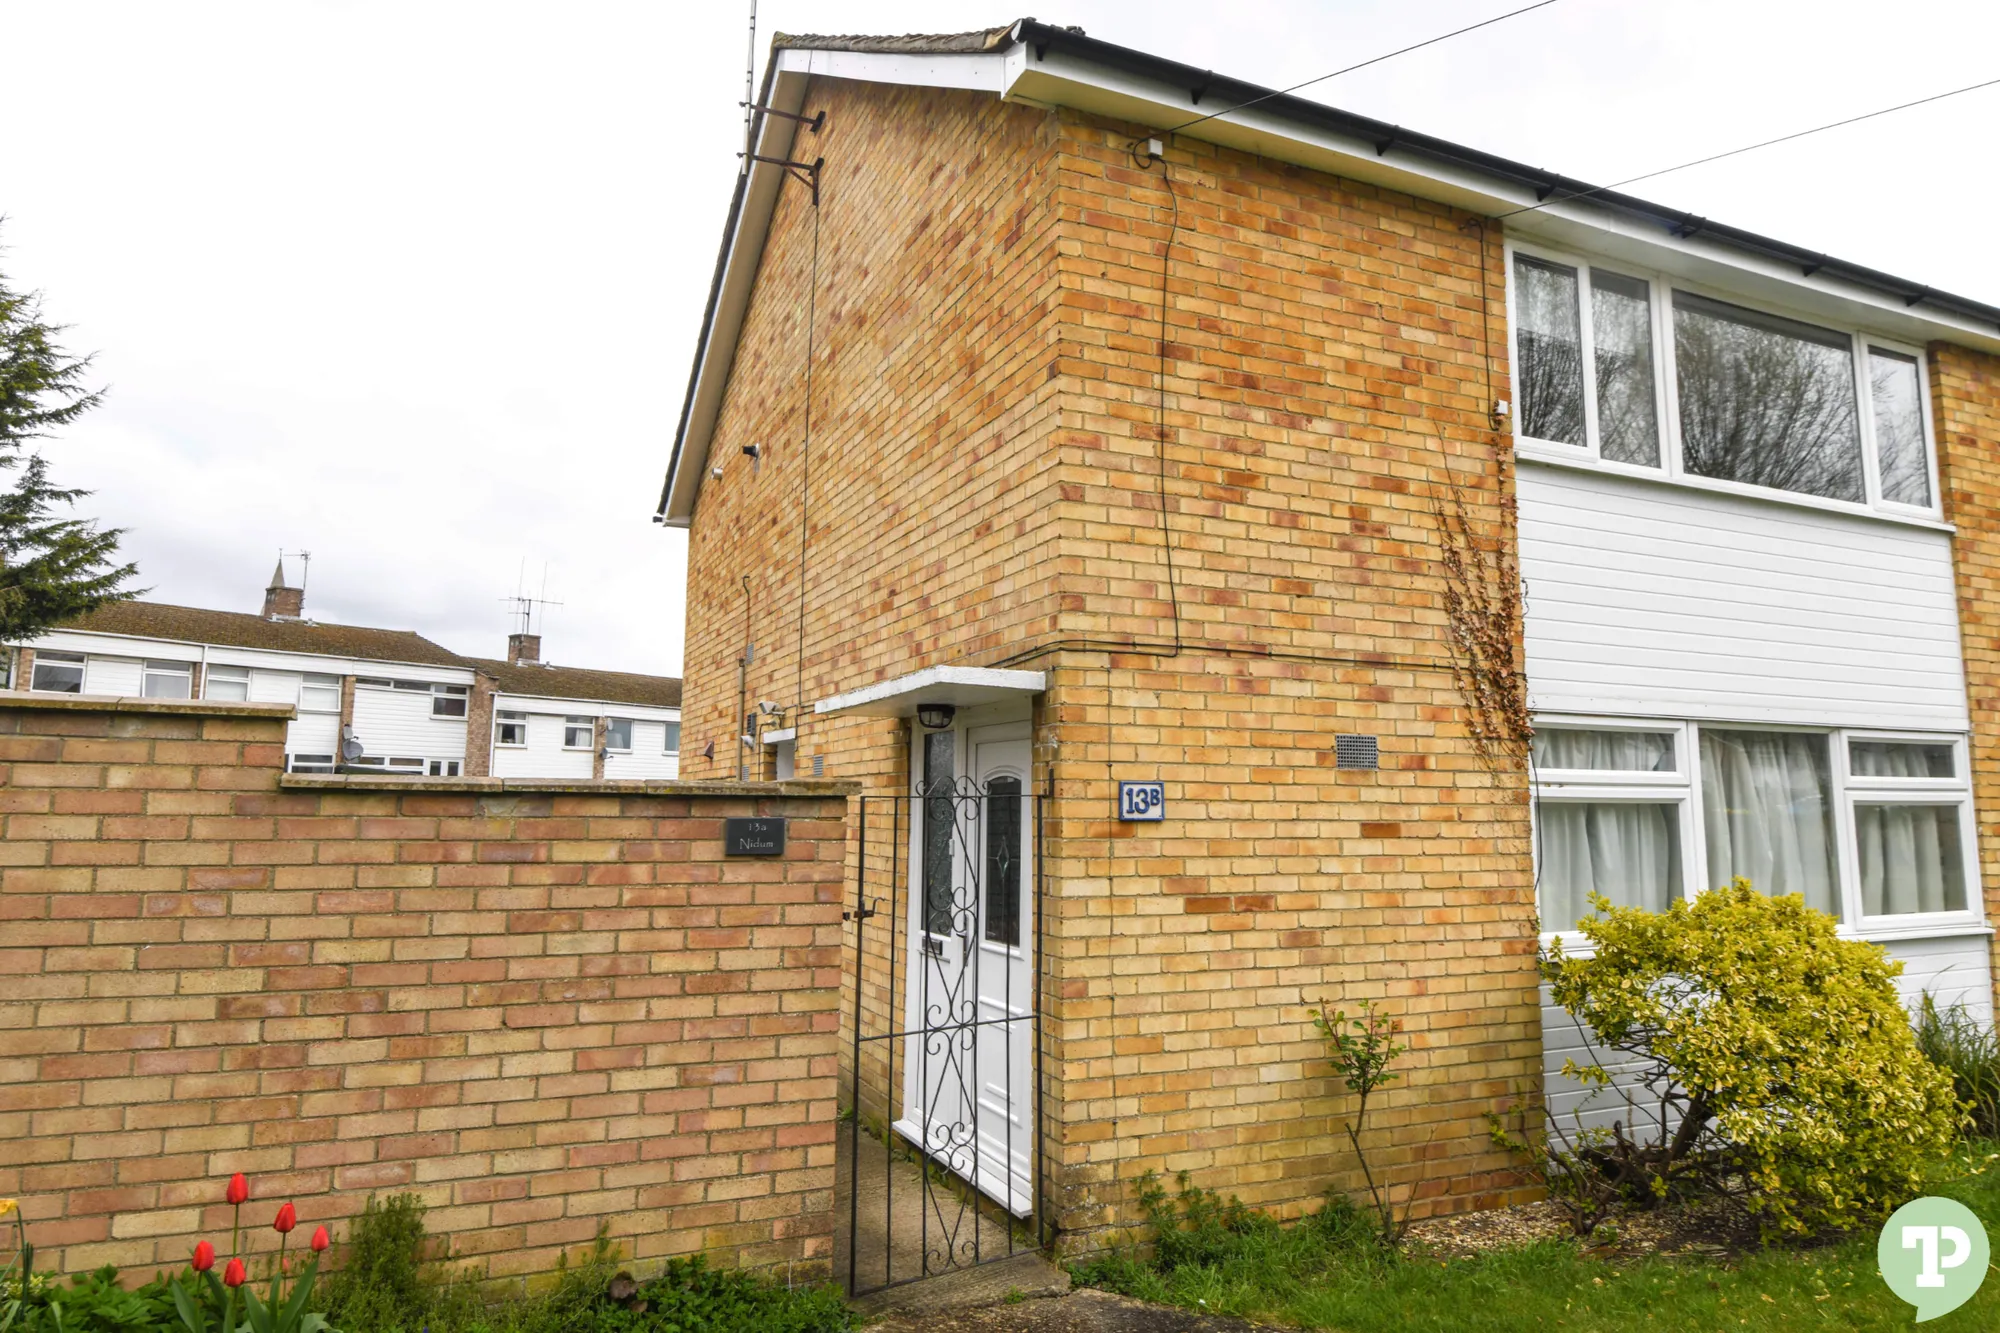 2 bed apartment to rent in Farm Close Road, Oxford - Property Image 1